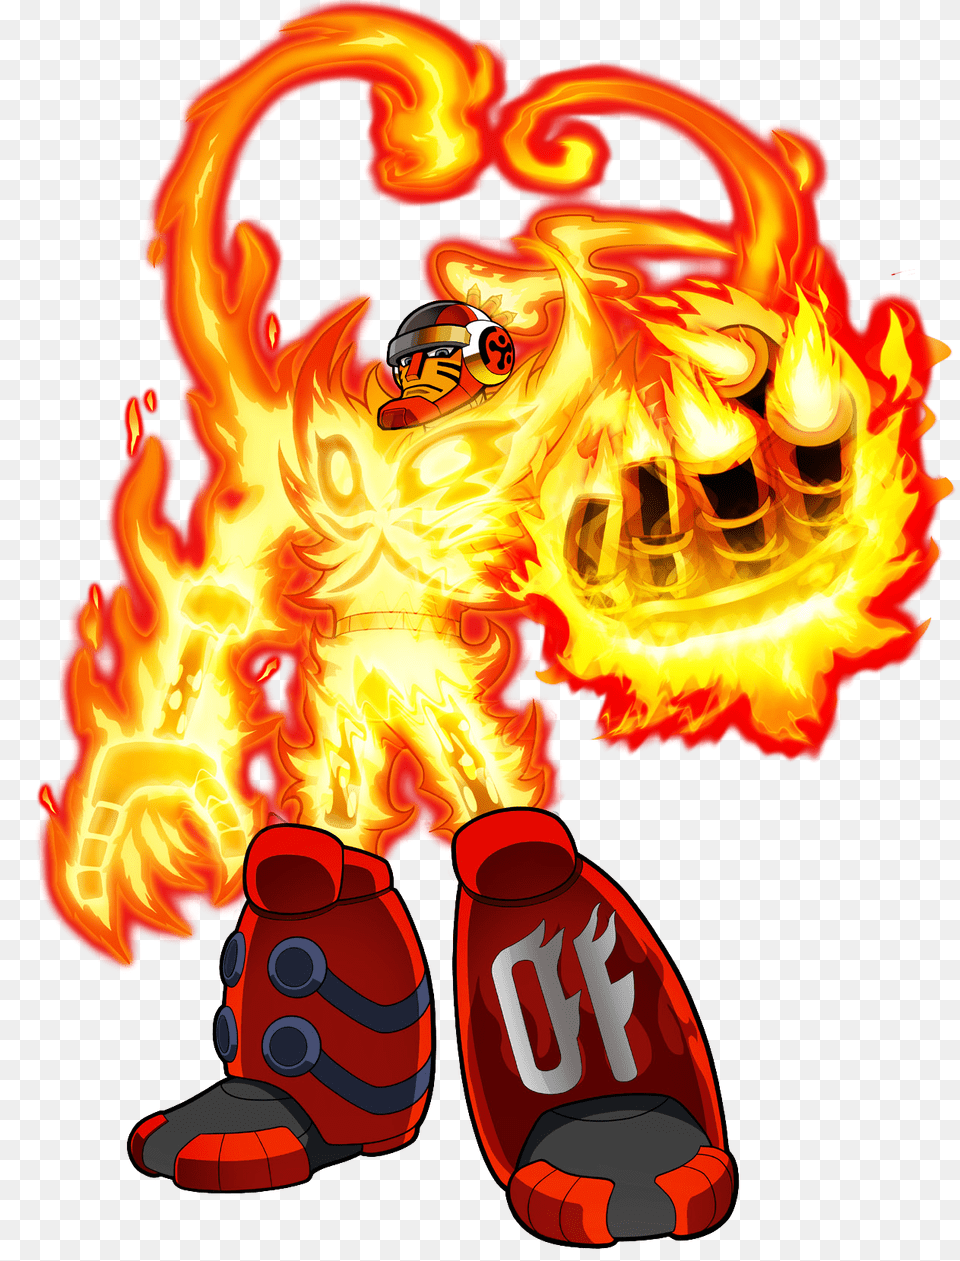 Pyrogen Mighty No Wiki Fandom Powered, Fire, Flame, Food, Ketchup Png Image